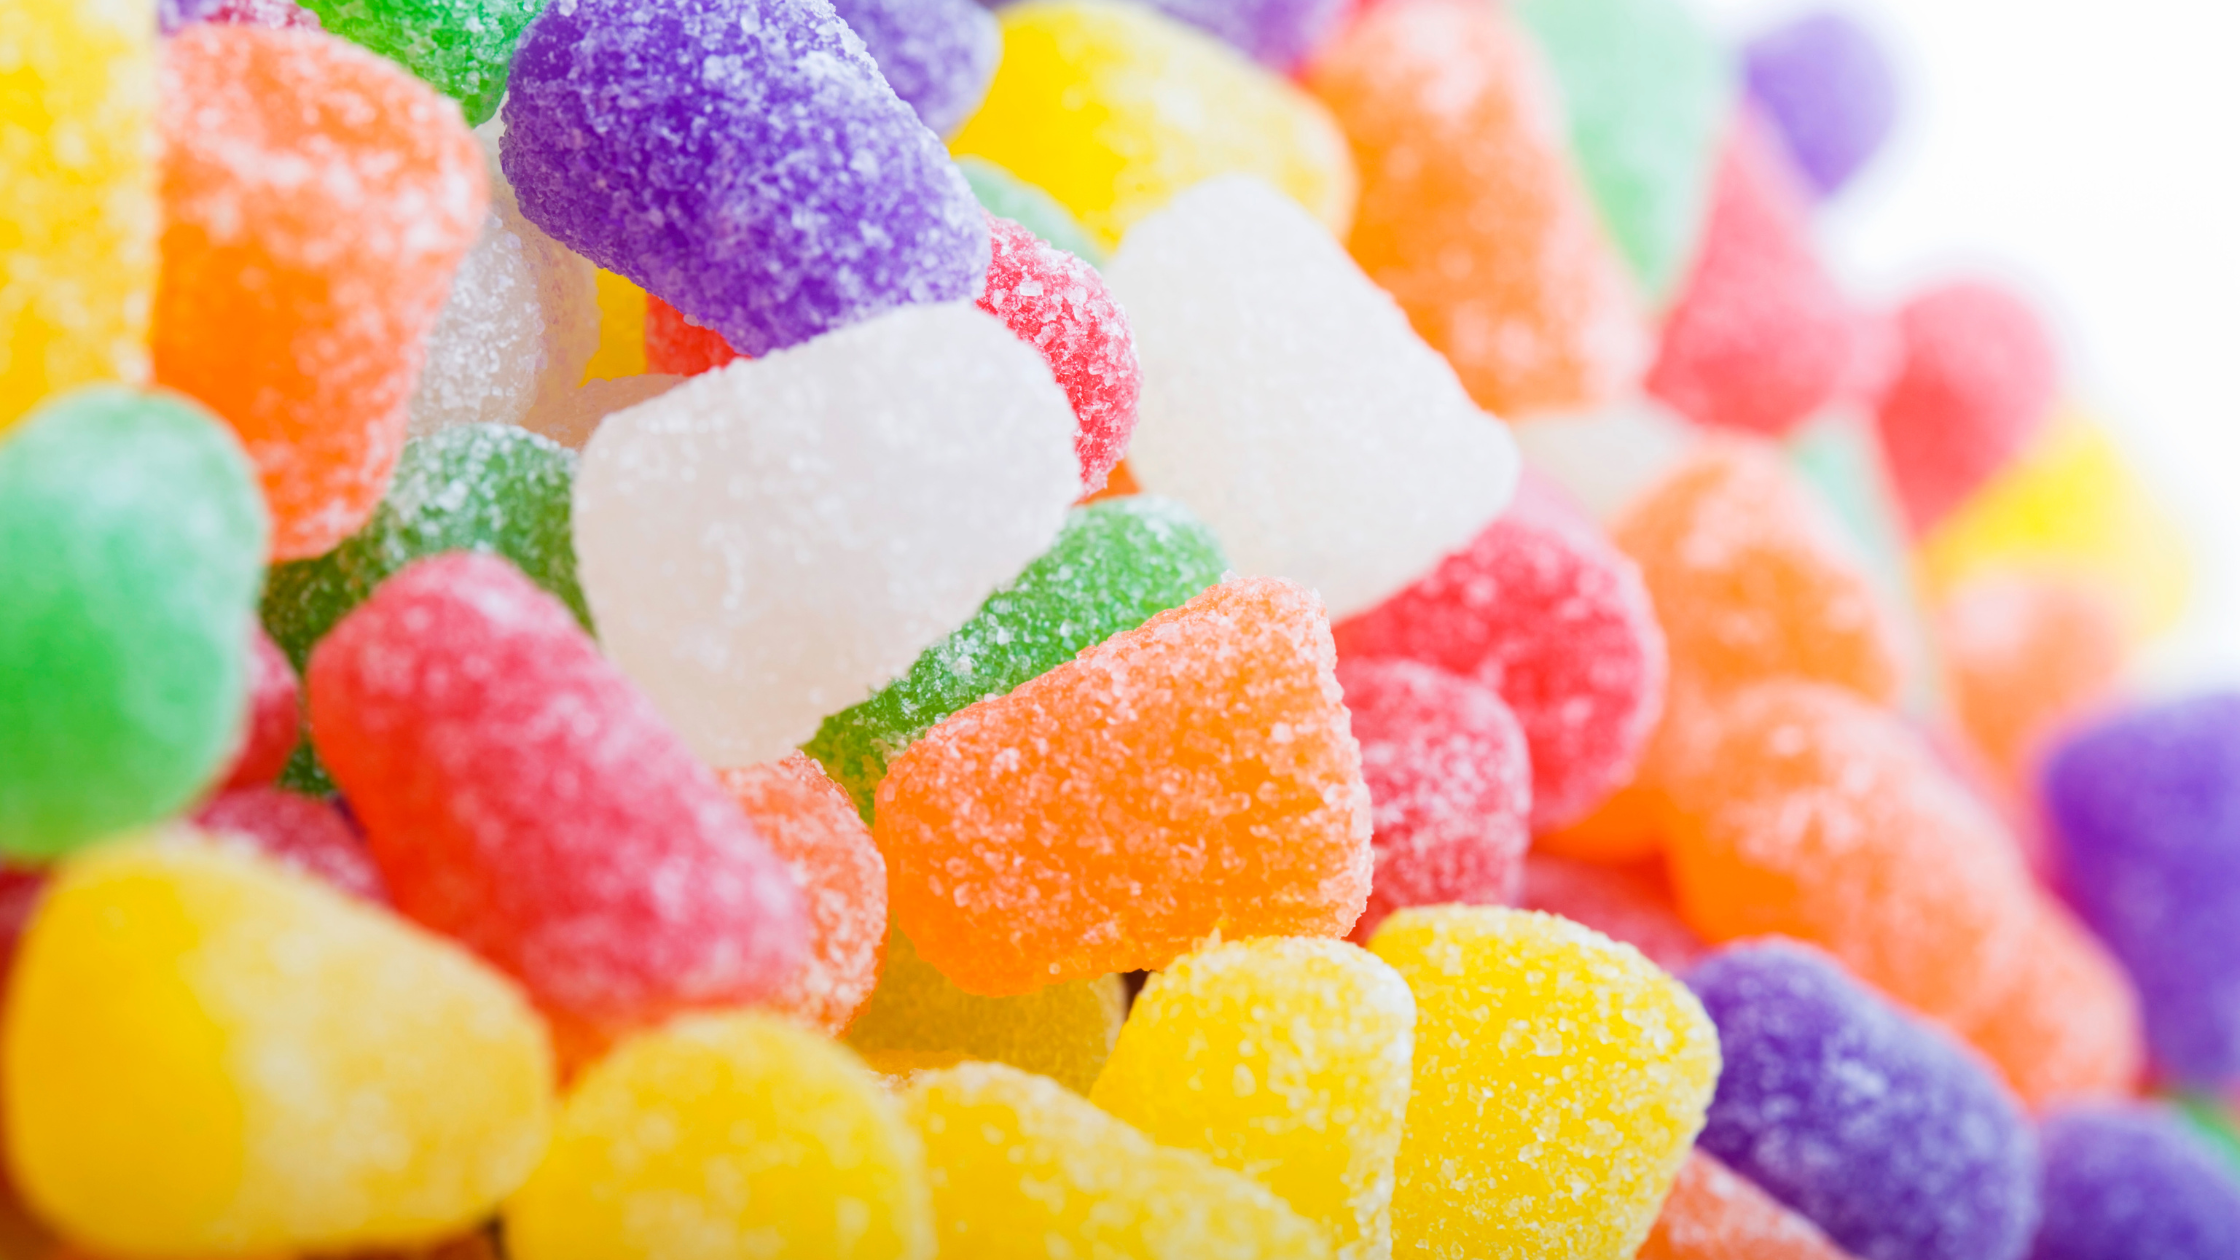 View Our Complete List of Dots Candy Flavors Available Now